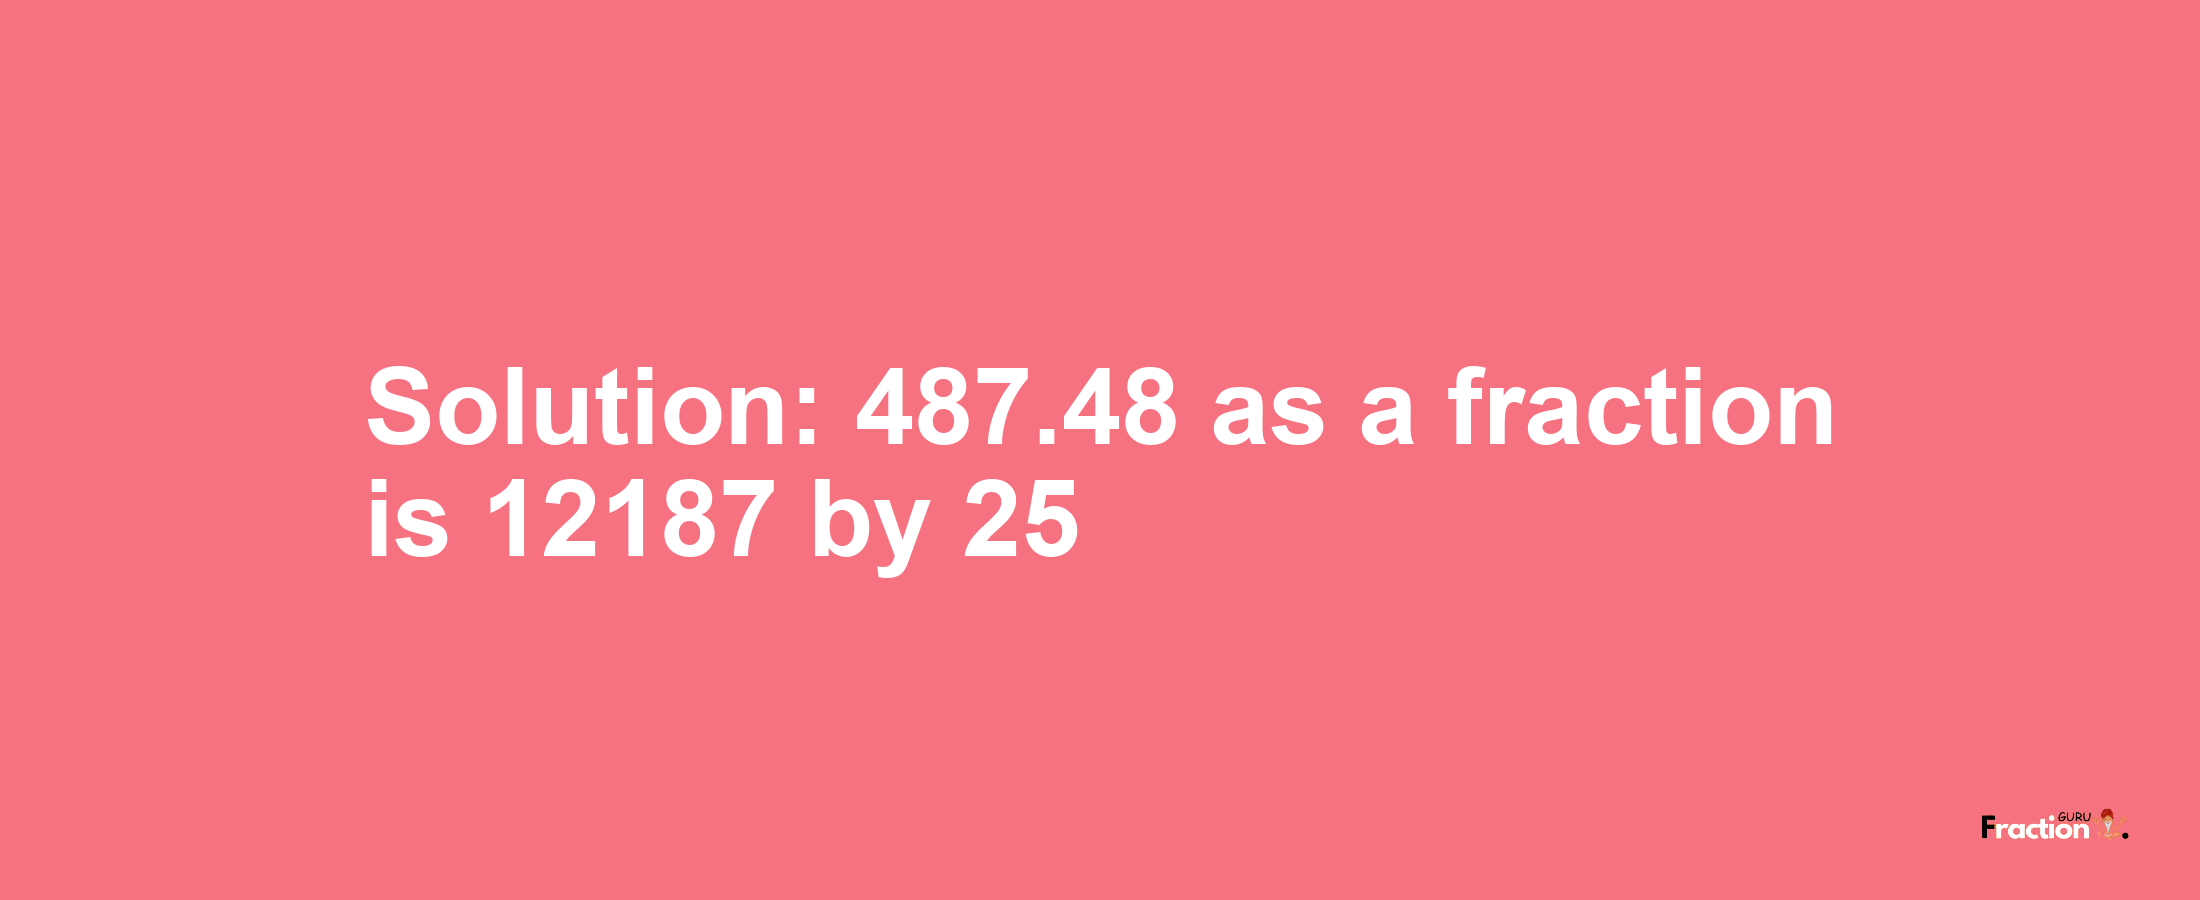 Solution:487.48 as a fraction is 12187/25